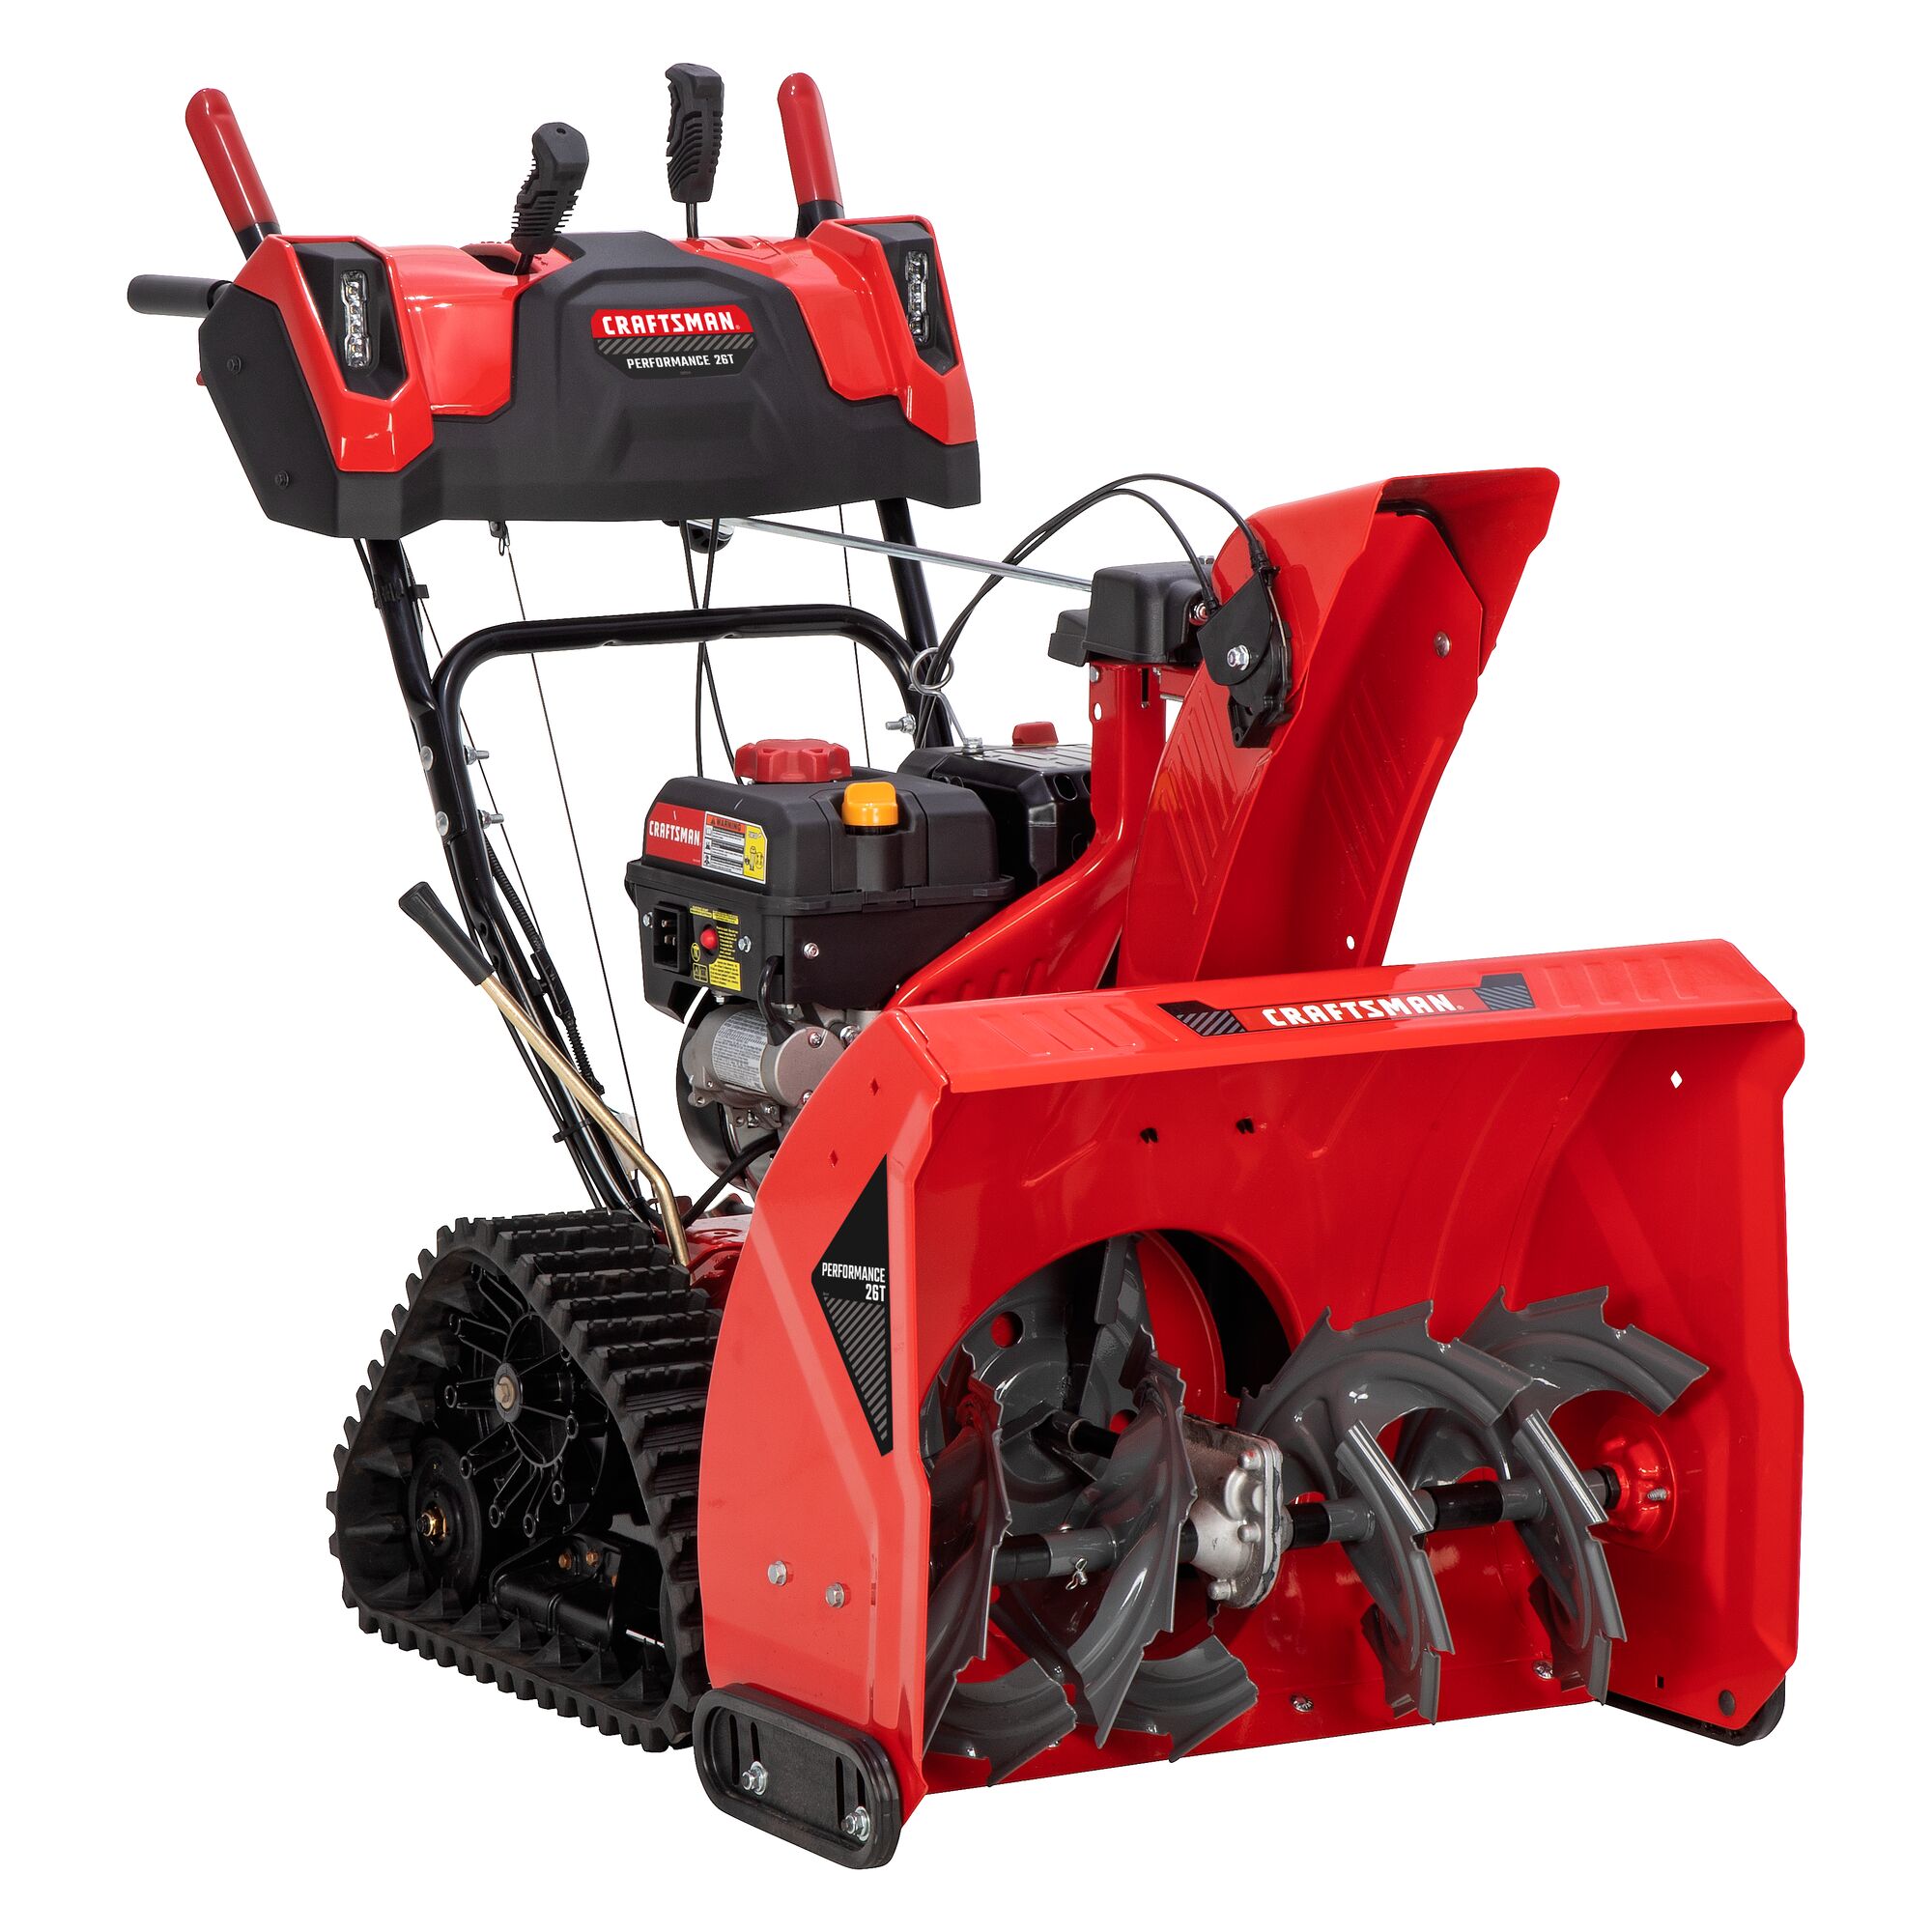 CRAFTSMAN Performance 26 Track Snowblower right side ¾ view